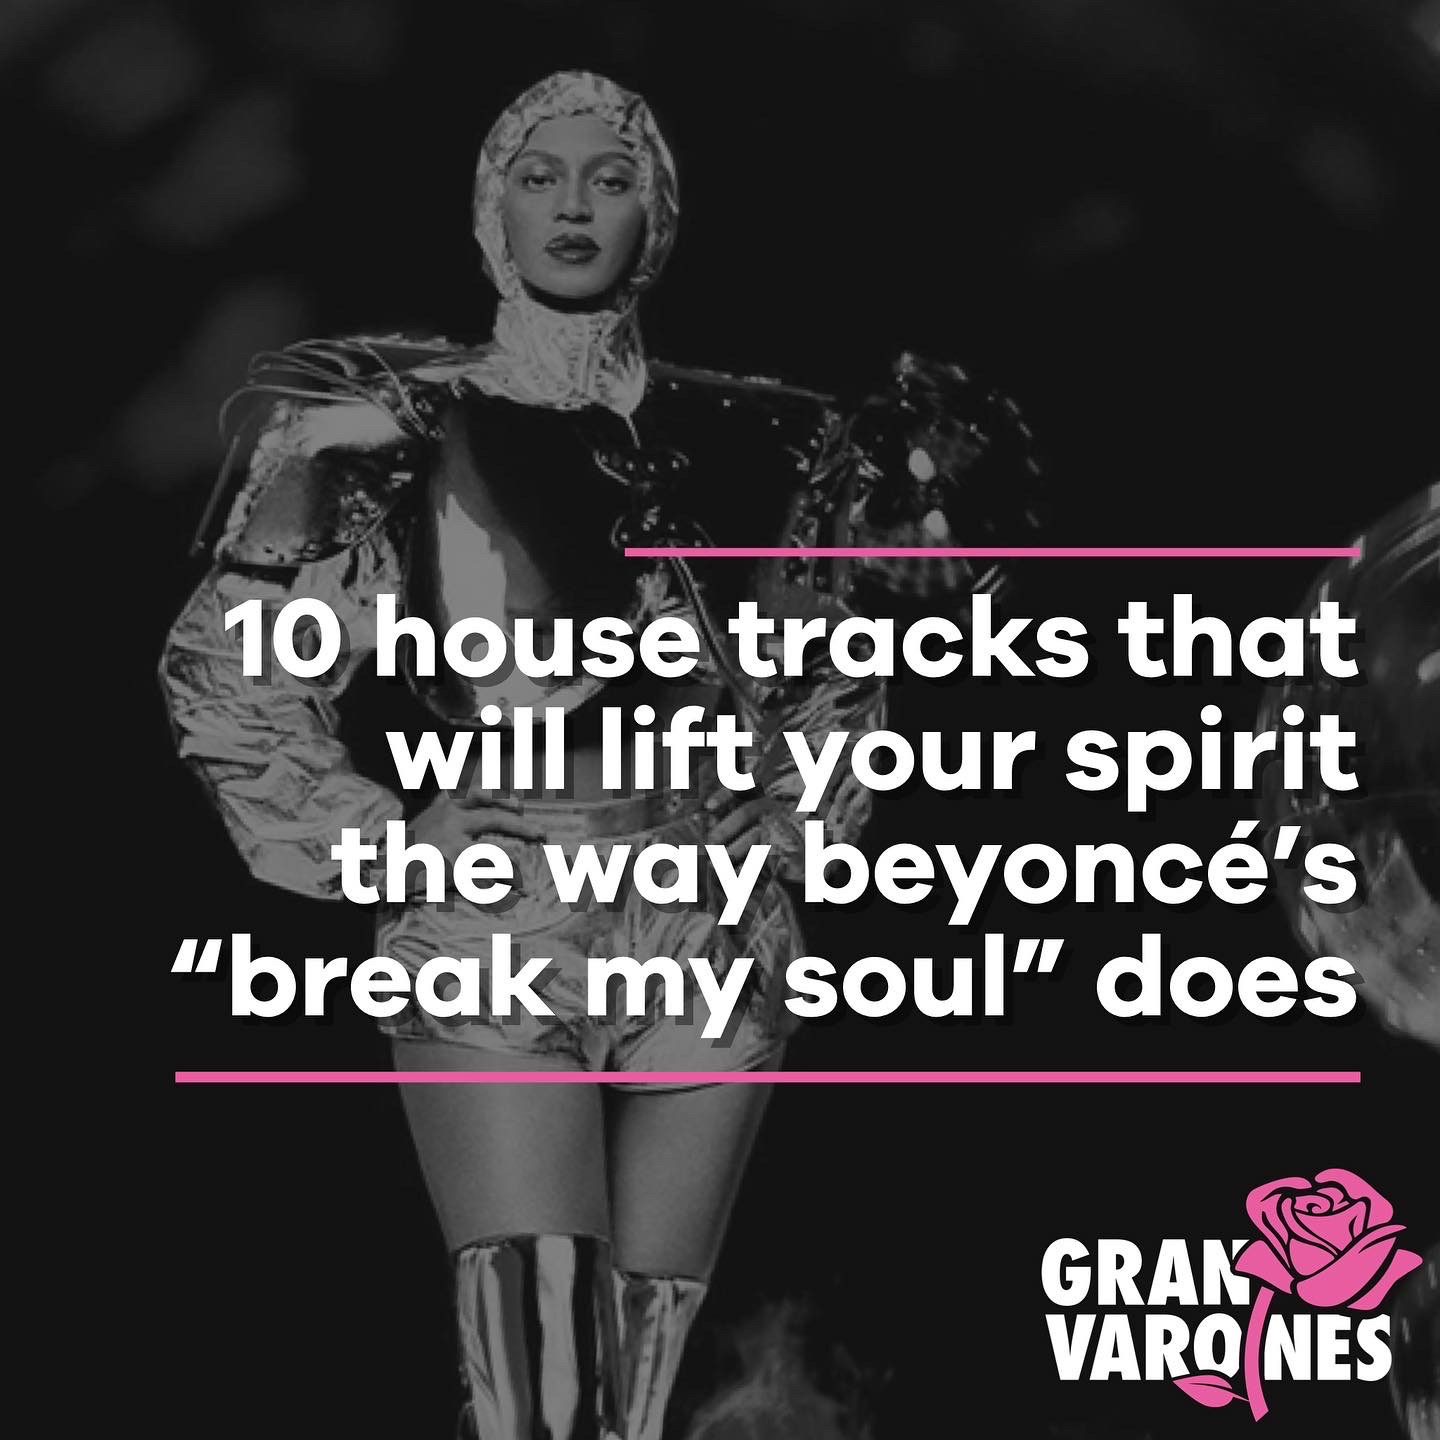 Ten House Tracks From the 90s that Will Lift Your Spirits the way Beyoncé’s “Break My Soul” Does